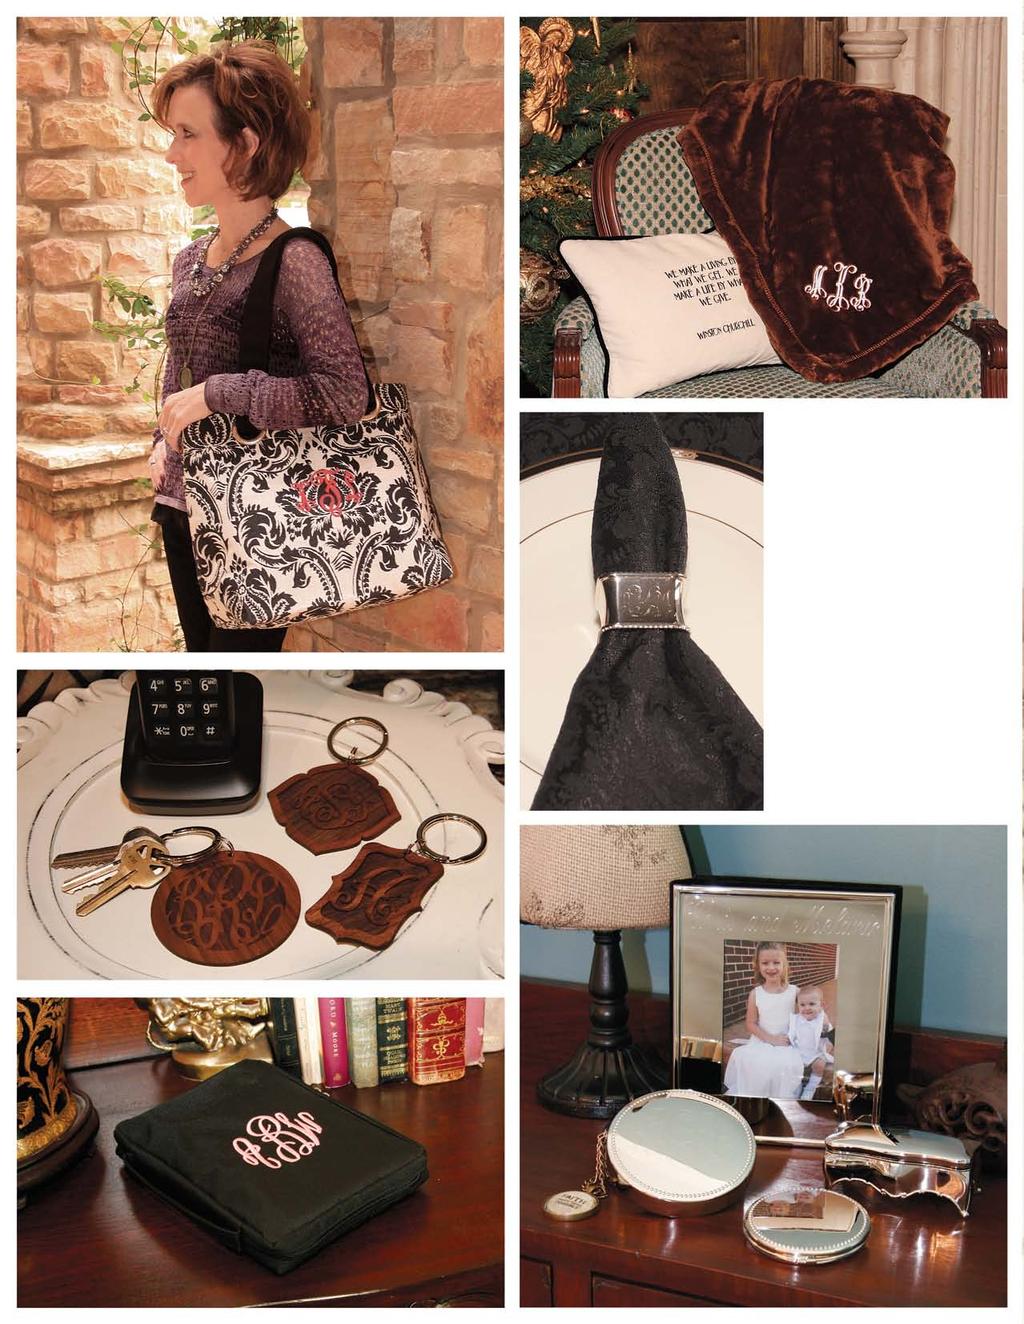 a. EH0085 $59 Brocade Traveler Tote d. b. a. EB0019 $65 Cozy Throw b. GG0088 $30 Square Napkin Rings set of 4 rings, 1.5 all sides c. GG0104 $39 Round Wooden Keychain d.